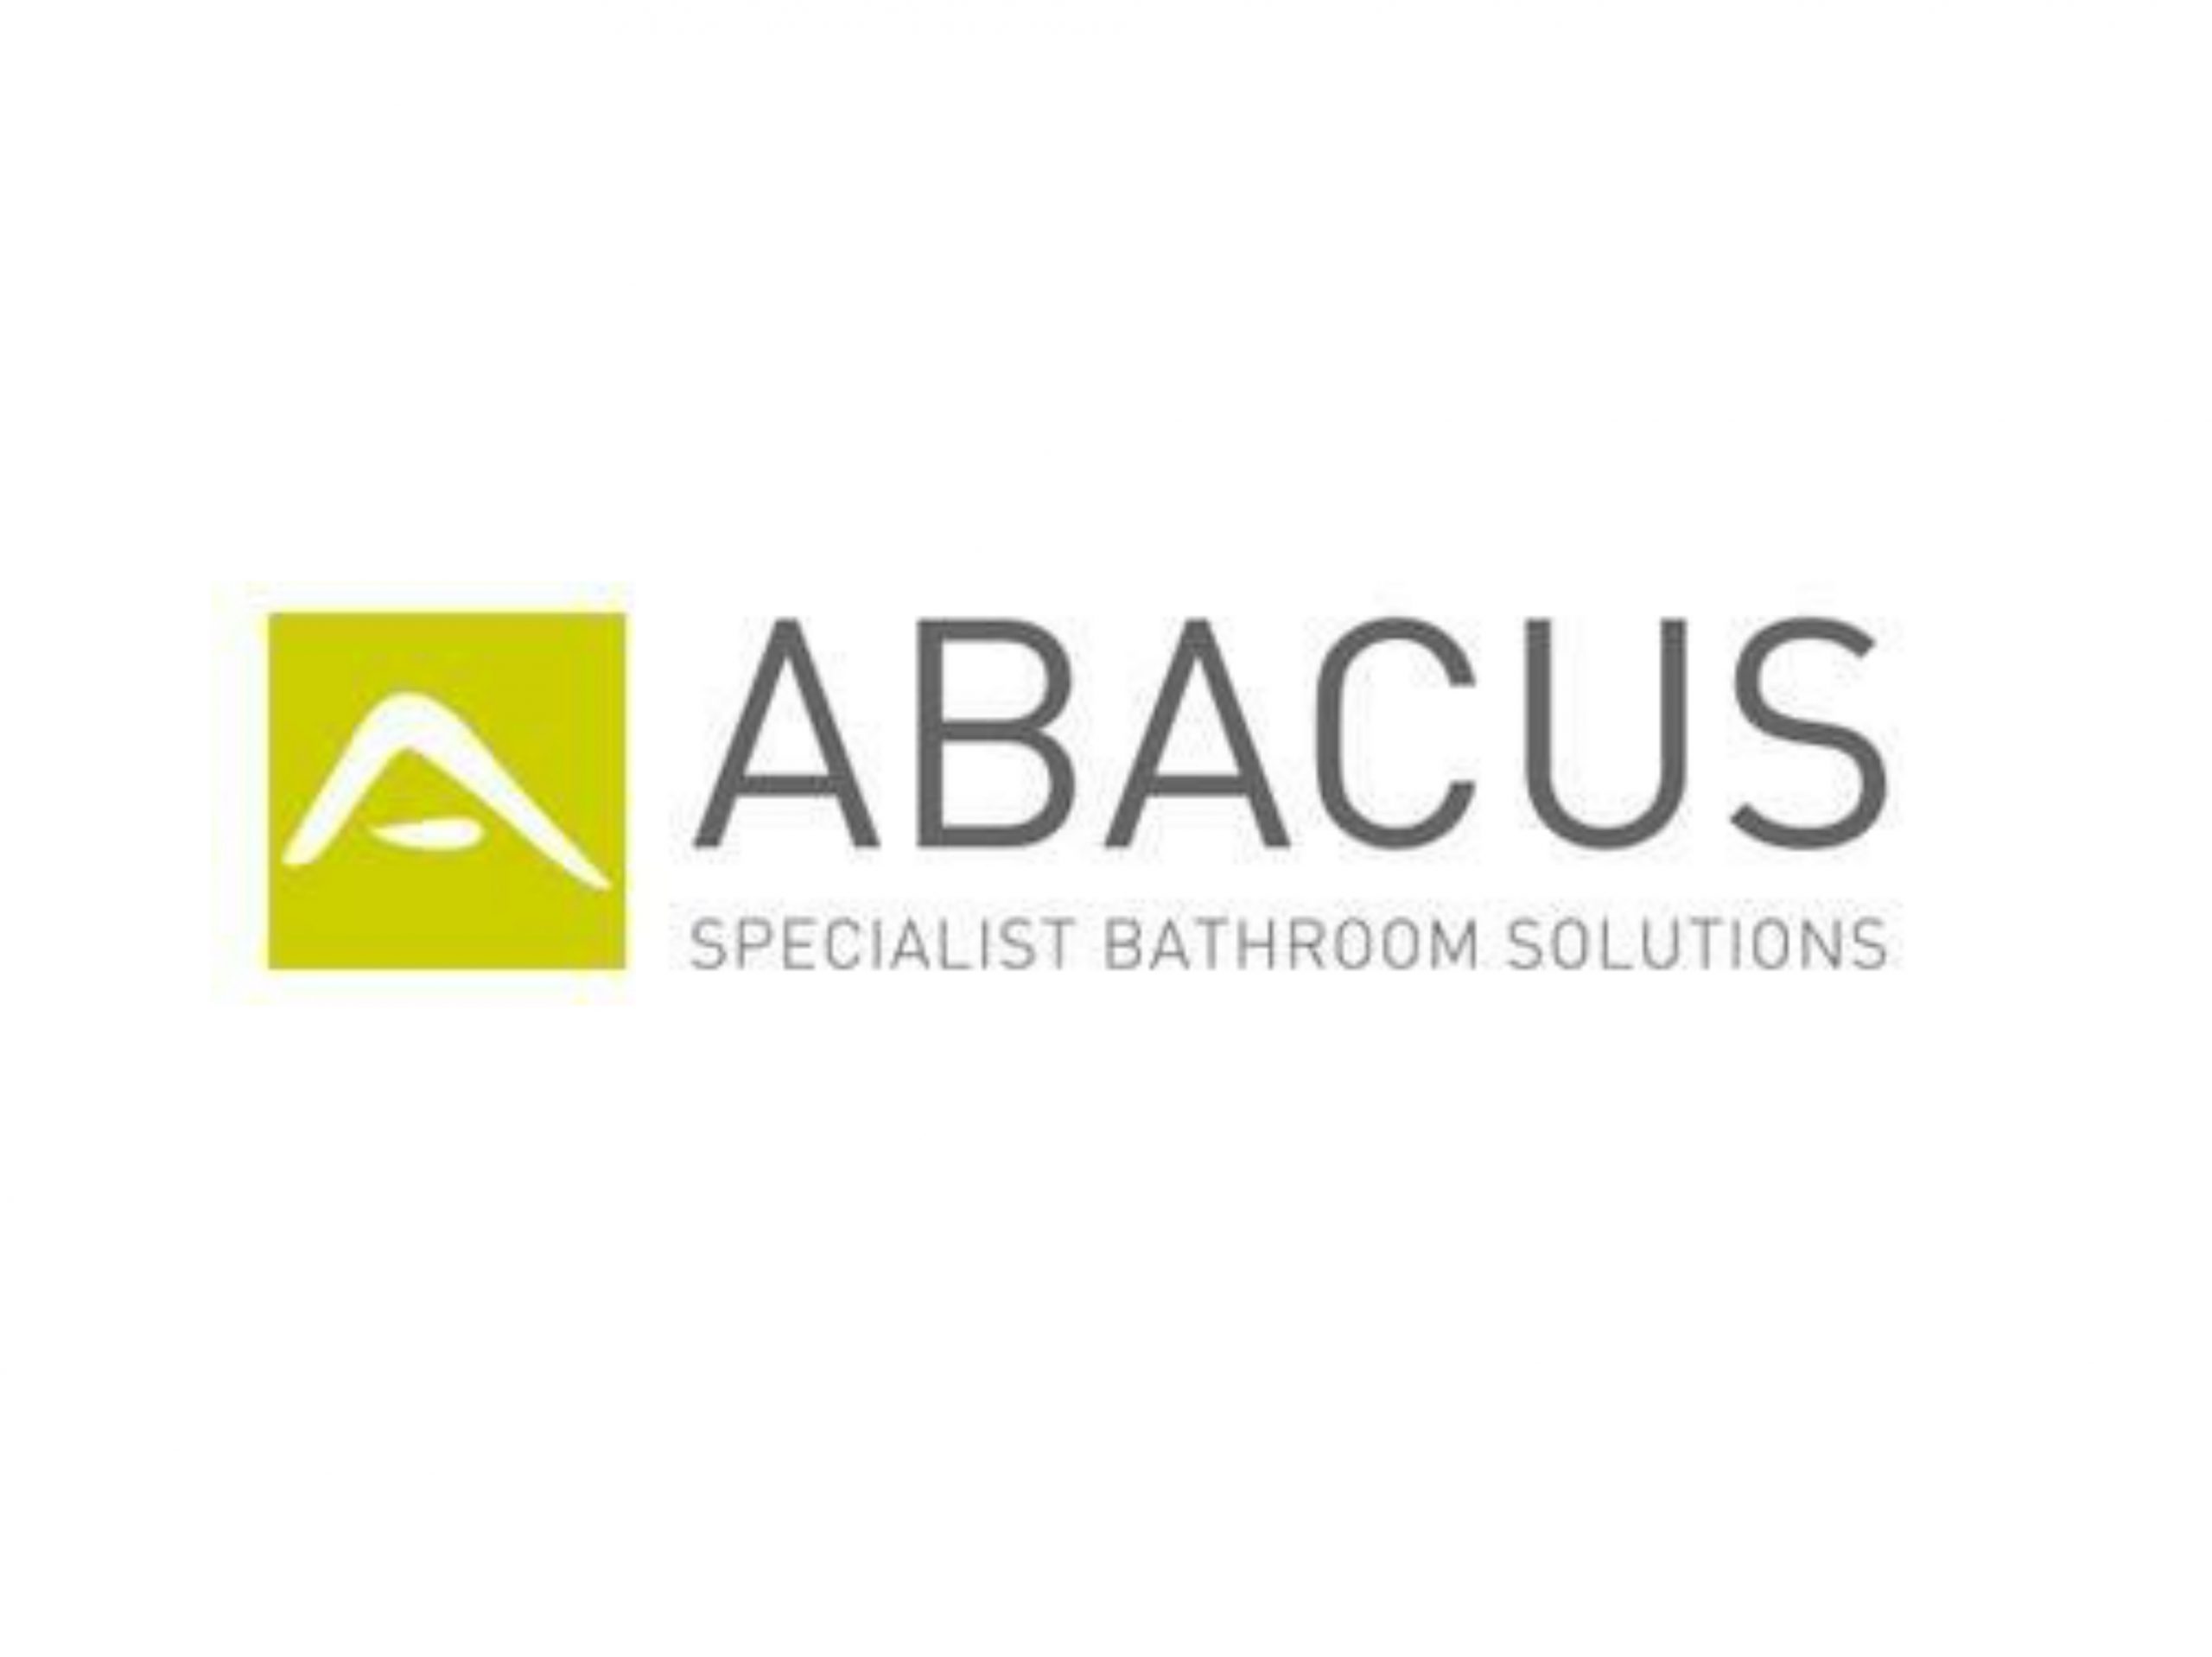 Kate Sheehan OT to present new Abacus CPD posture and bathing seminar at Kidz Middle